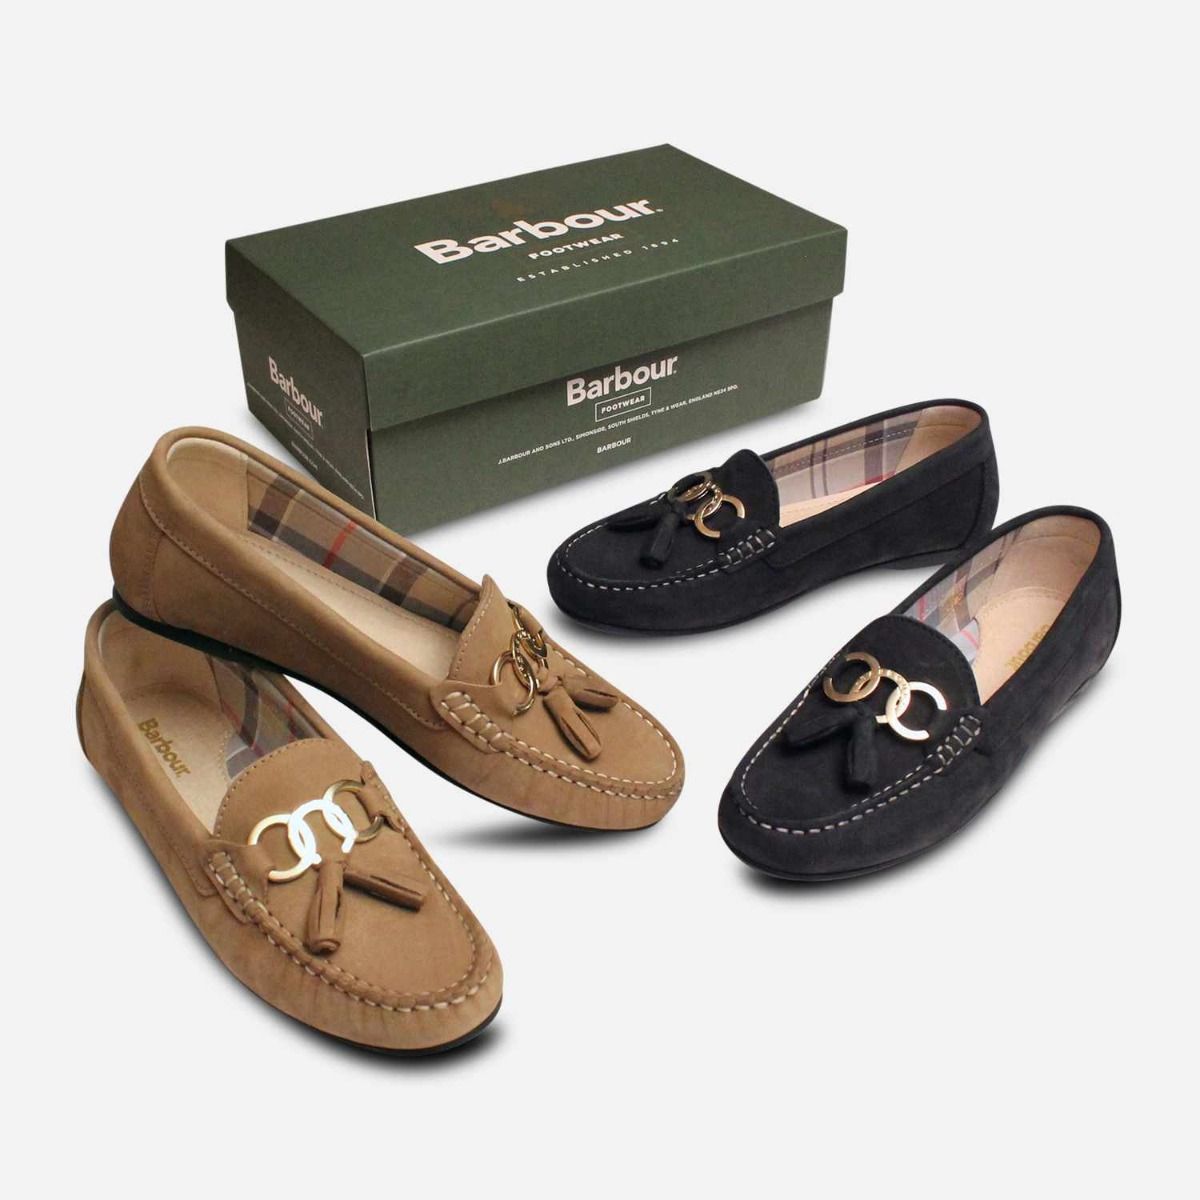 Barbour Taupe Nubuck Tassel Loafers with Gold Trim